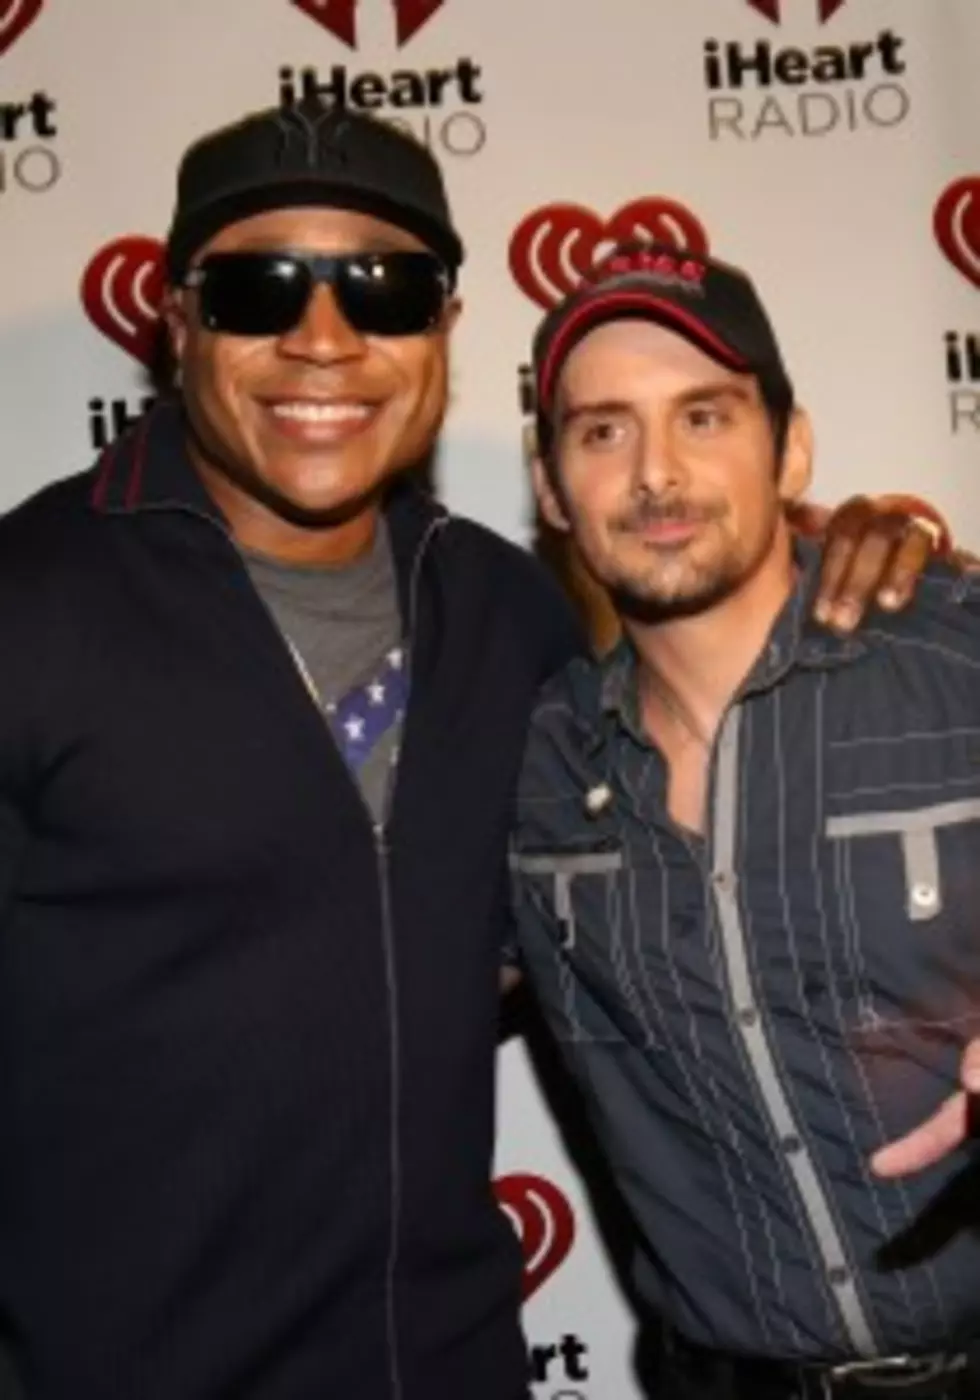 Brad Paisley and LL Cool J Get Together on ‘Accidental Racist’ – Is This the Worst Song Ever [POLL]